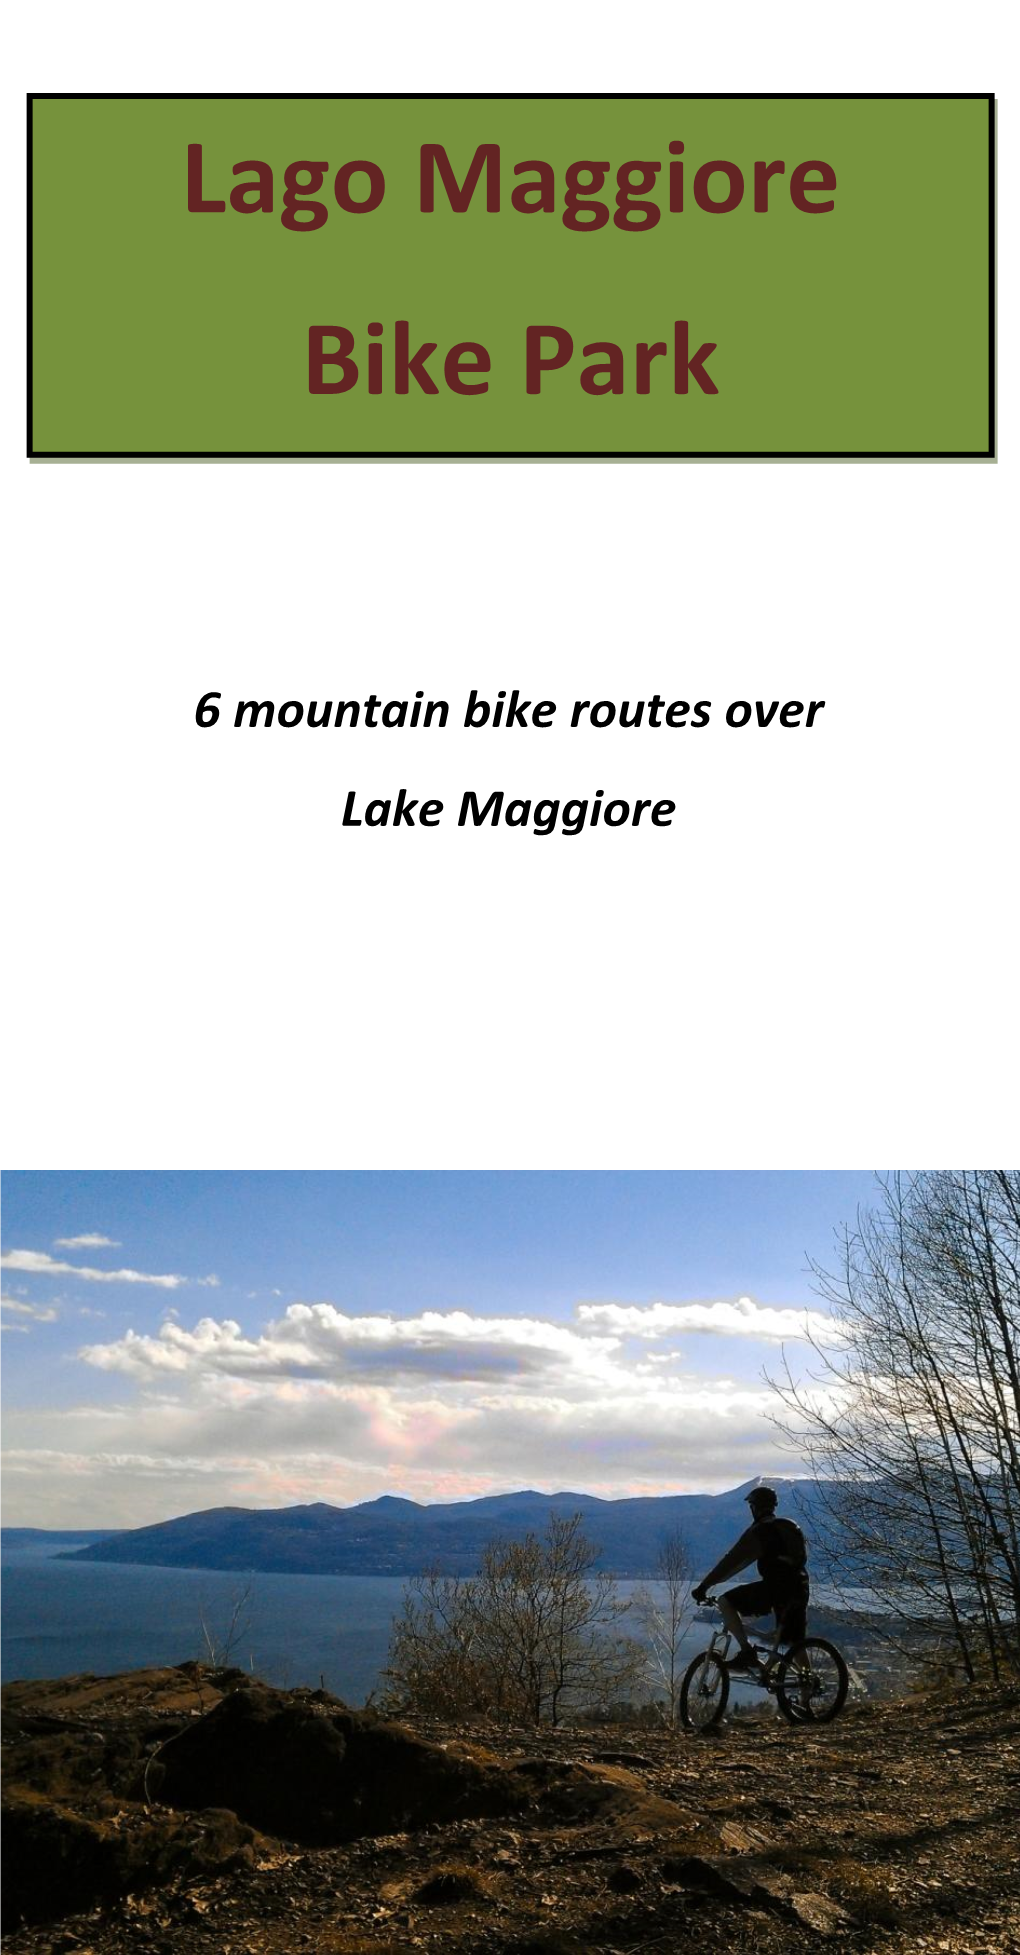 Lago Maggiore Bike Park Project Was Created with the Aim of Enhancing This Land Against Those Who Practice Mountain Biking